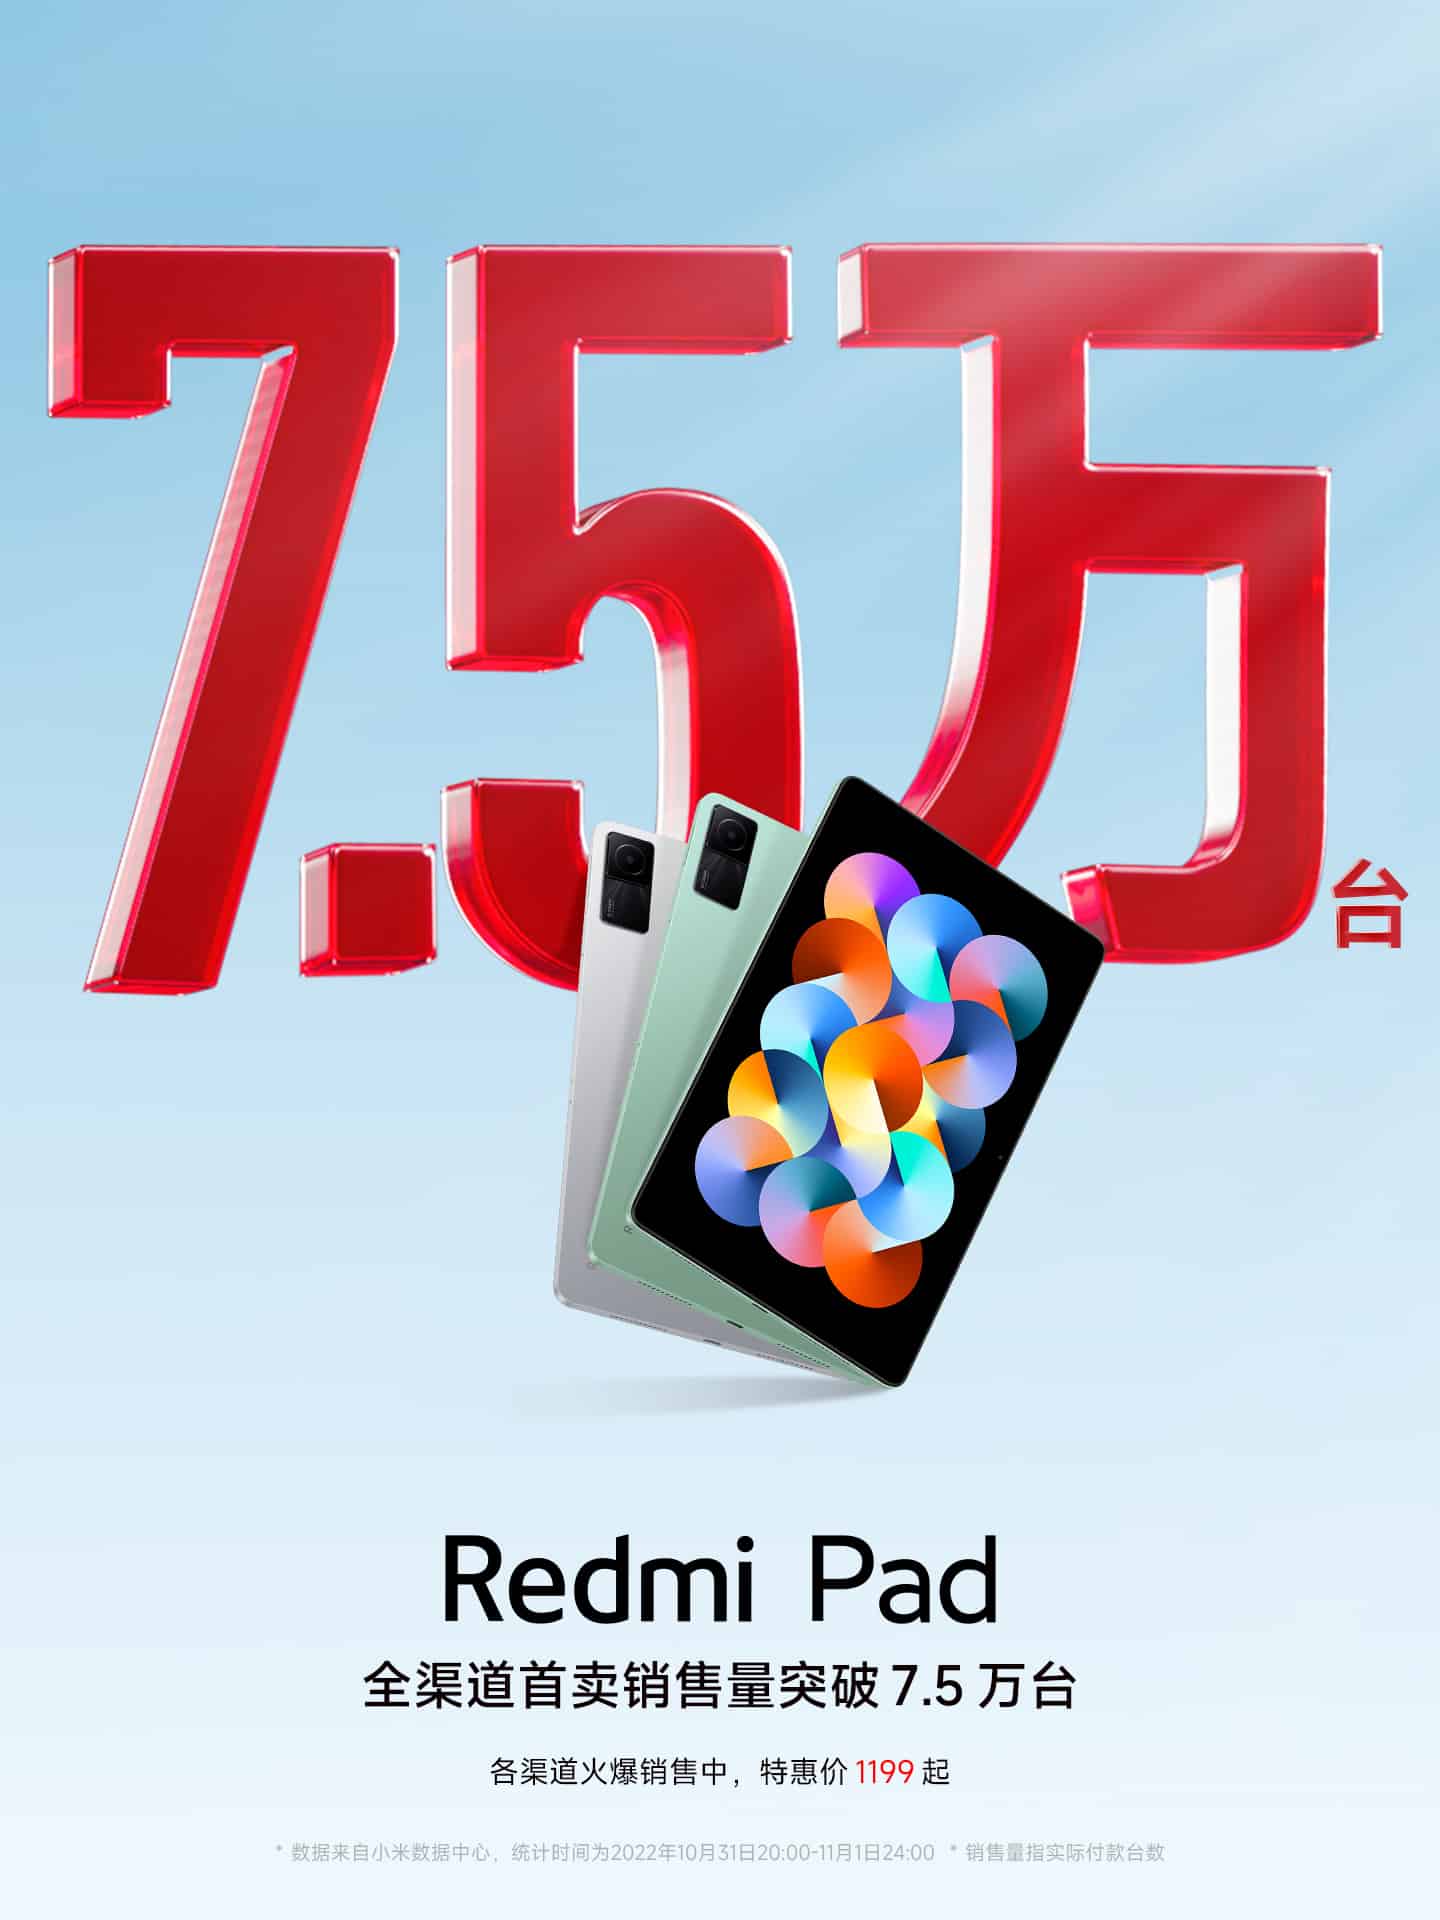 Redmi's first tablet